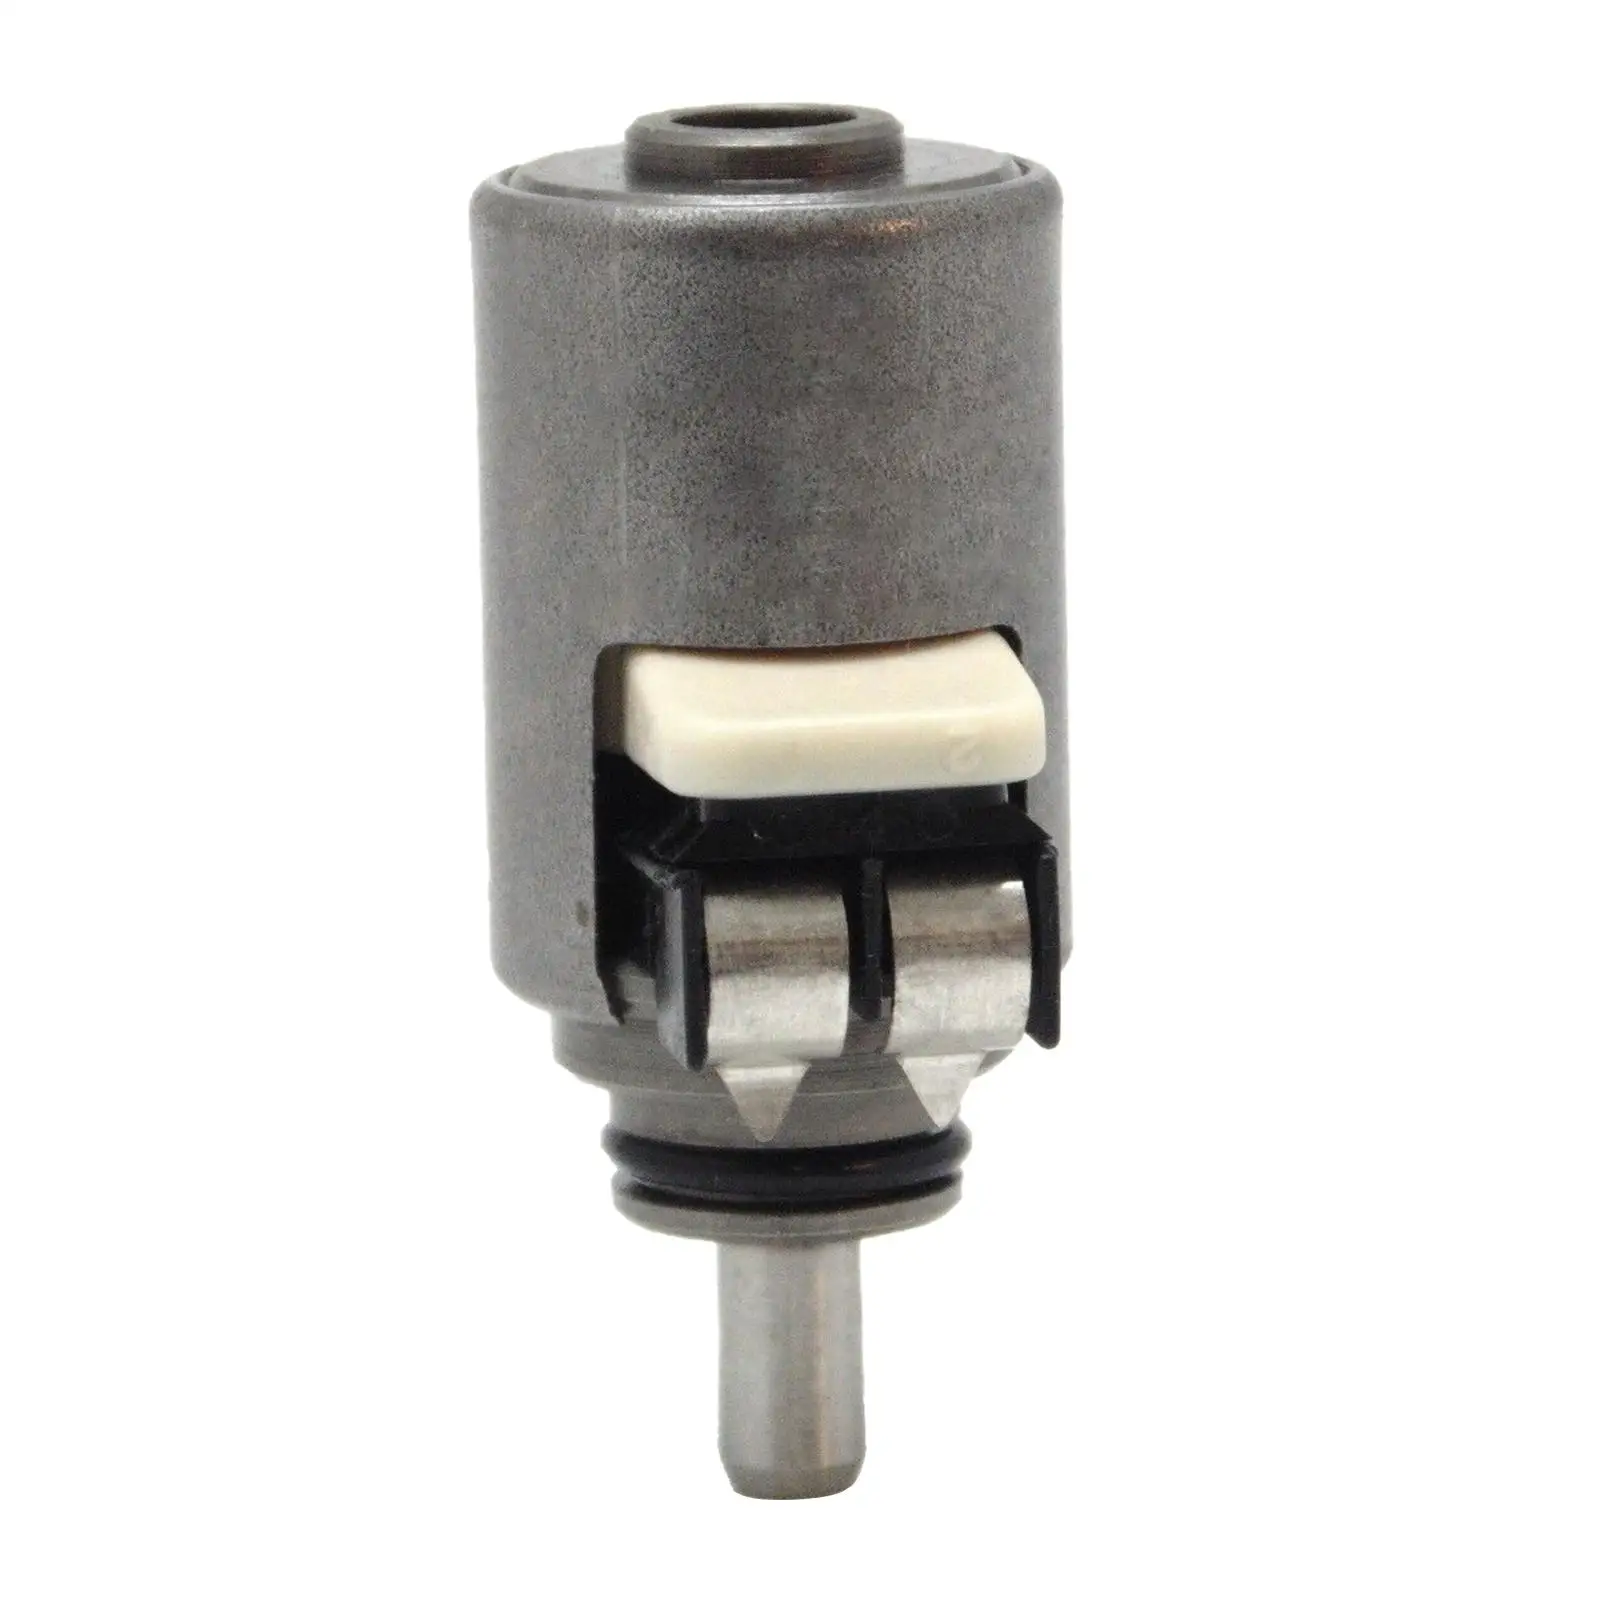 722.6 PWM Transmission Valve Solenoid Replaces A2402770100 Easy Installation 1402770435 Durable Metal for Mercedes-Benz